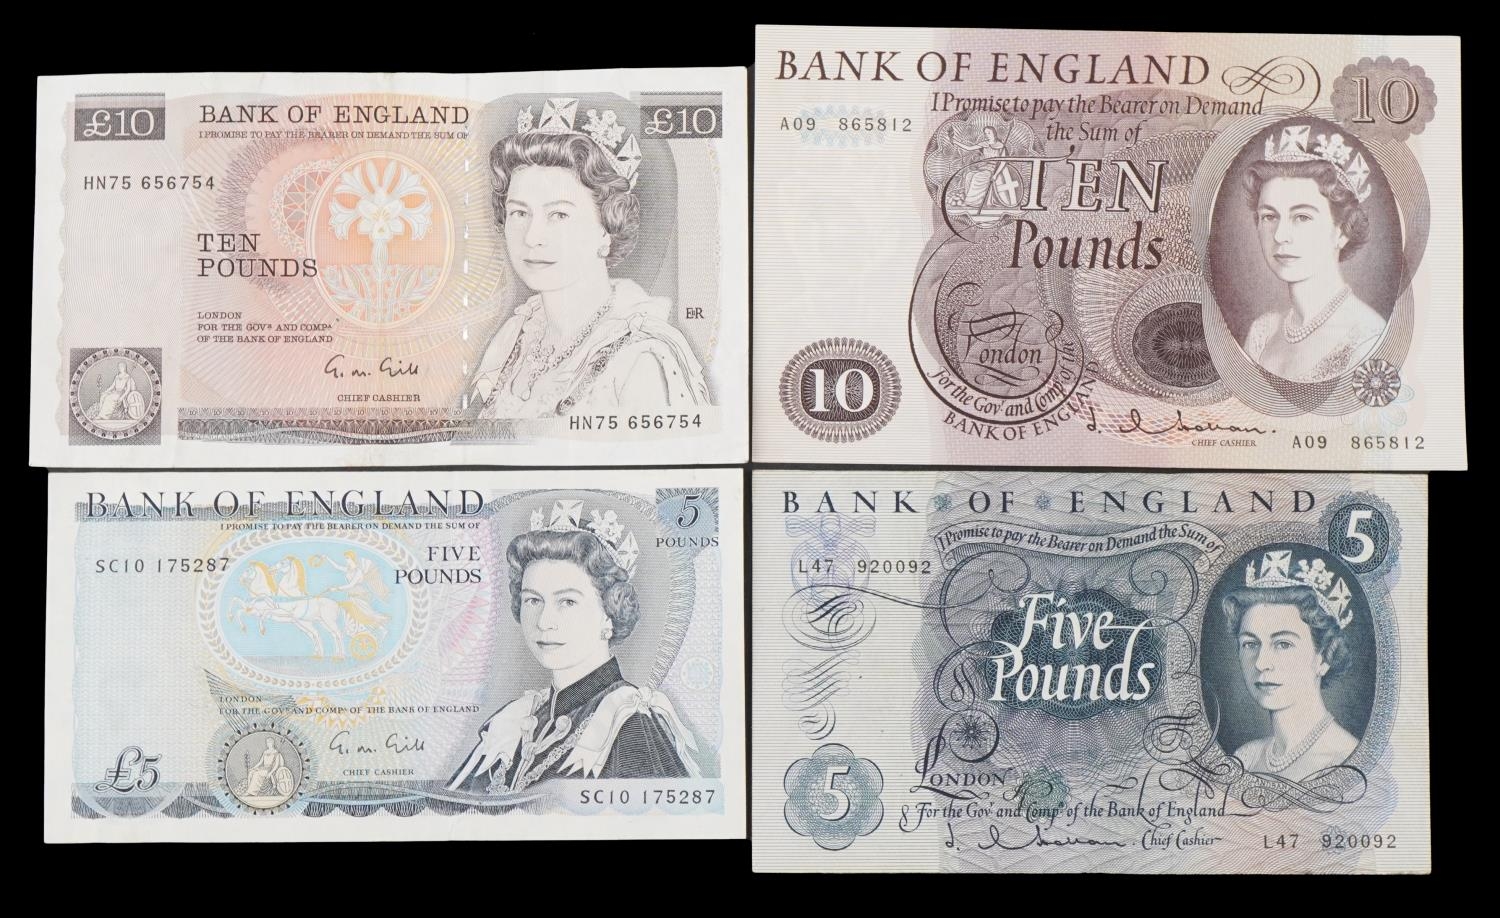 Two ten pound Bank of England banknotes and two five pound Bank of England banknotes